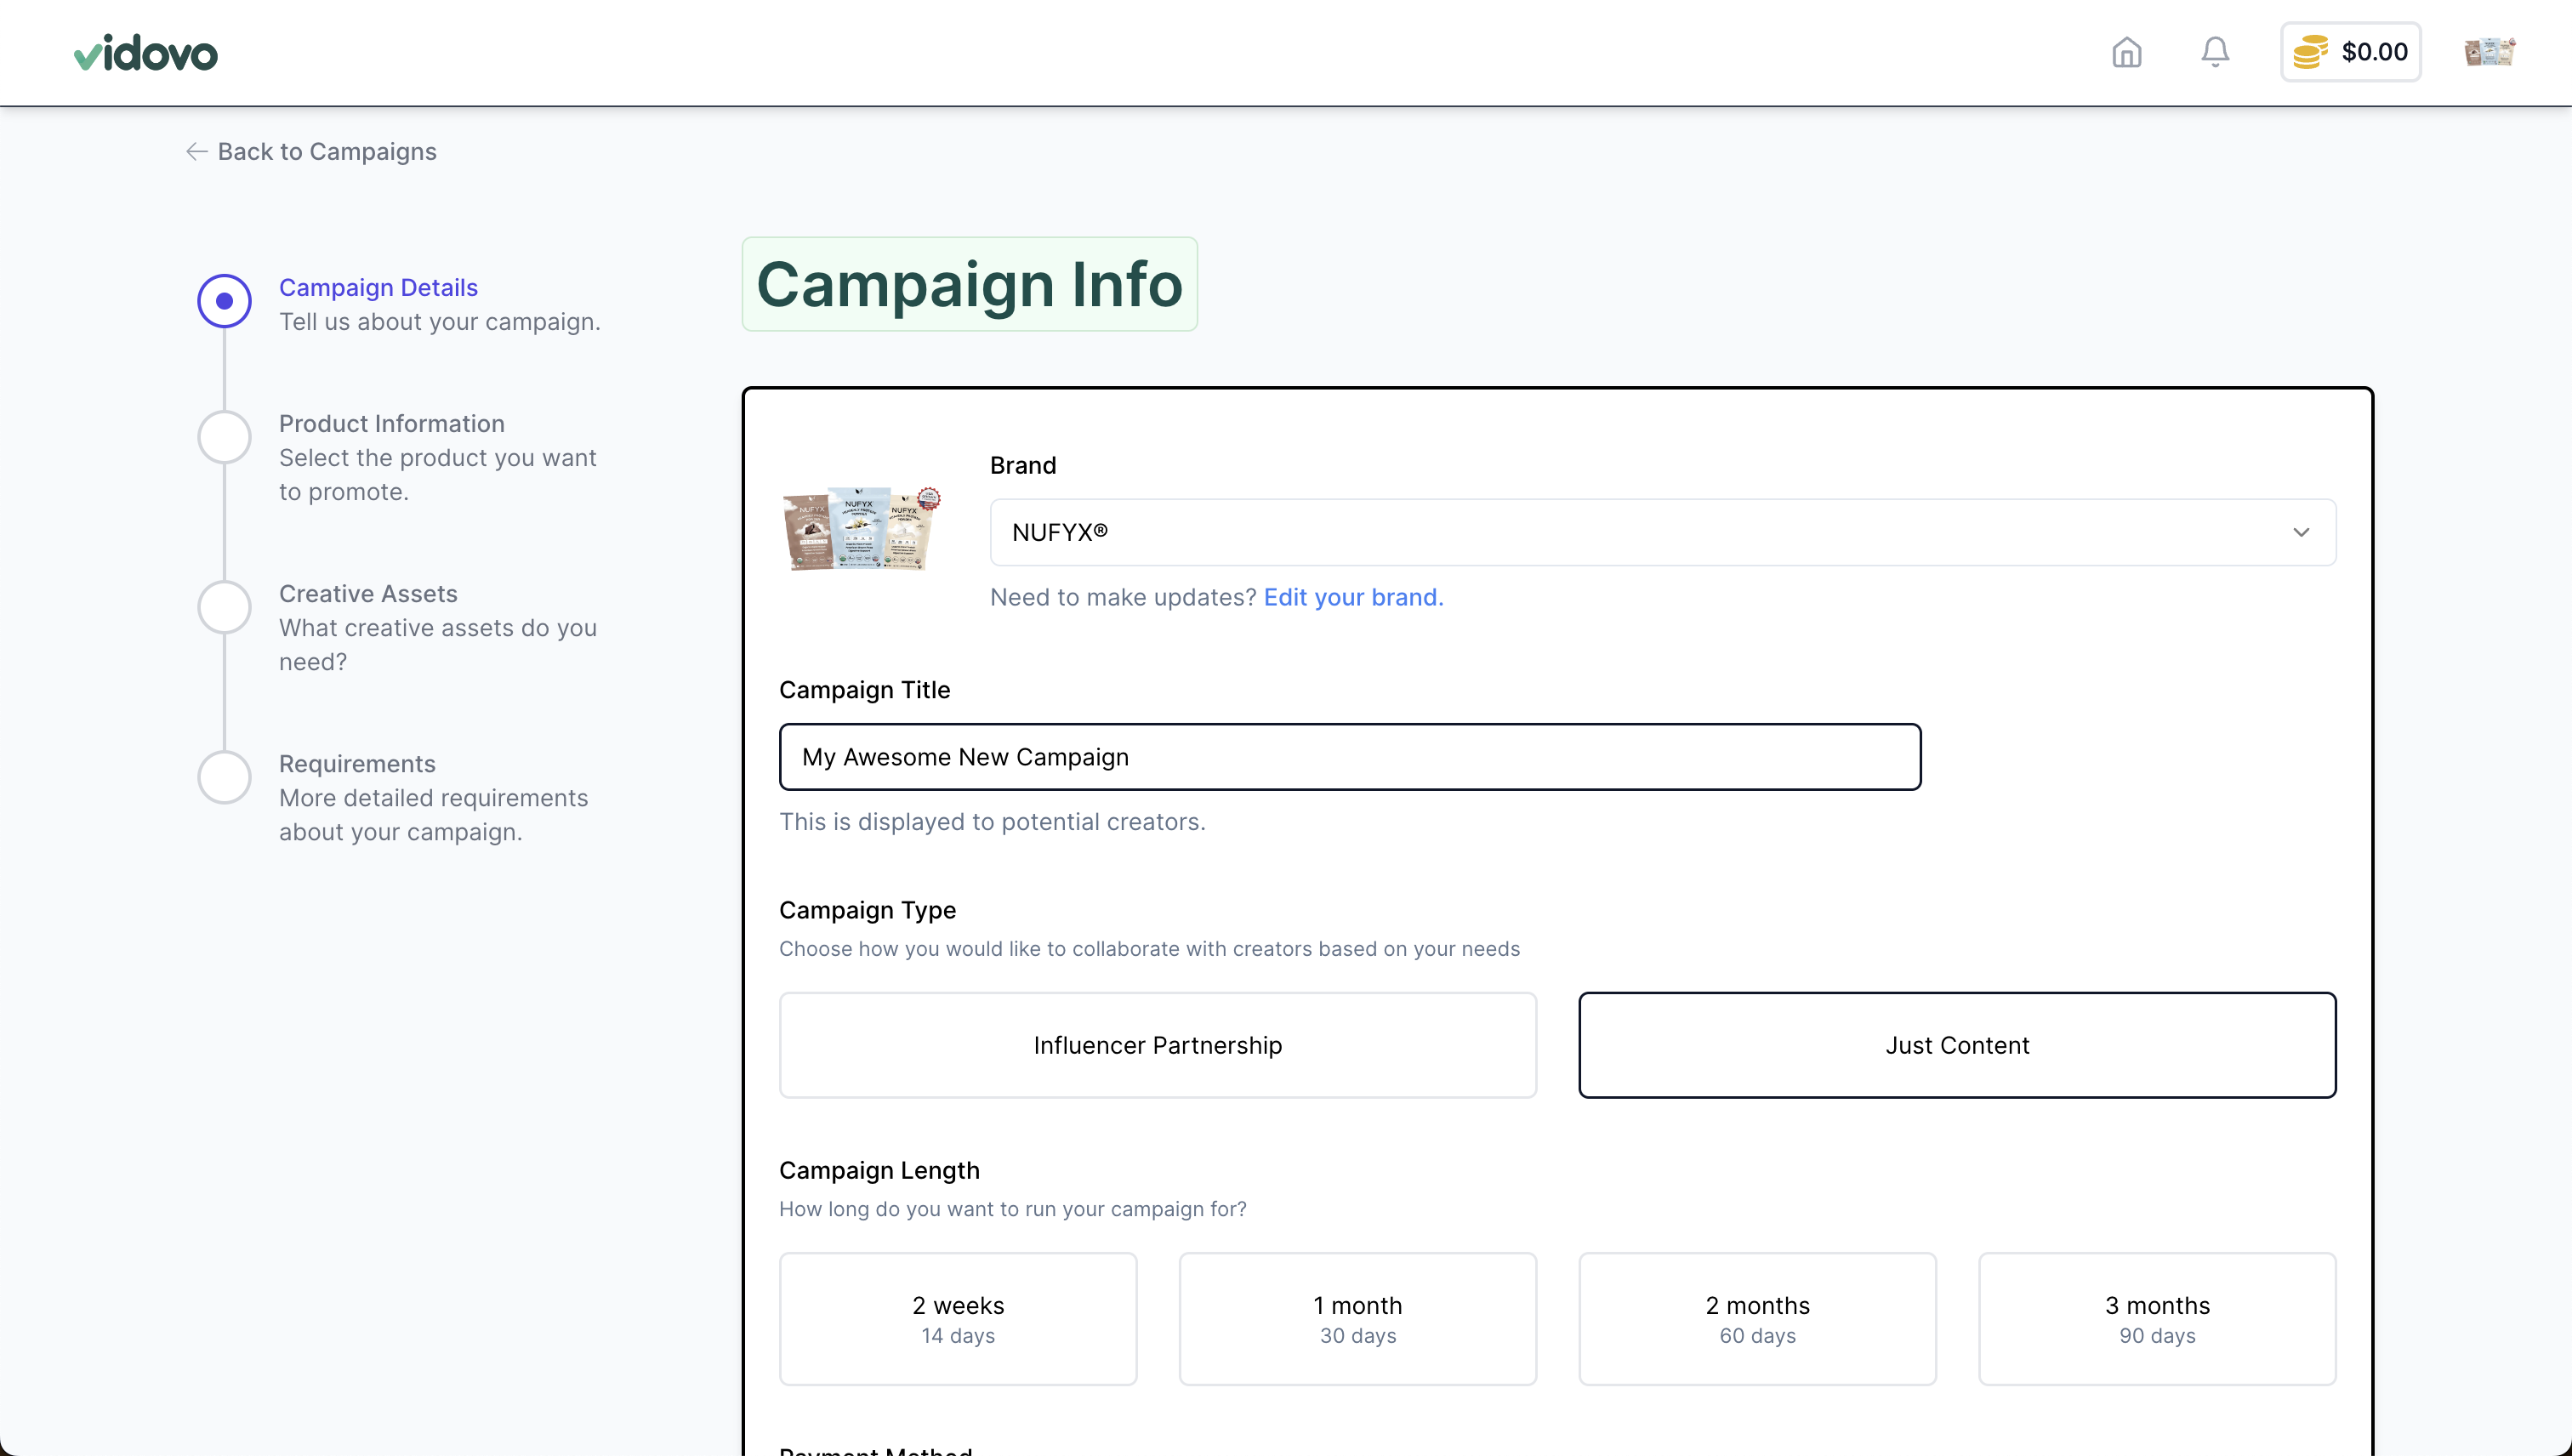 The create a campaign page. This is where you can create a campaign and publish it to our talent network.